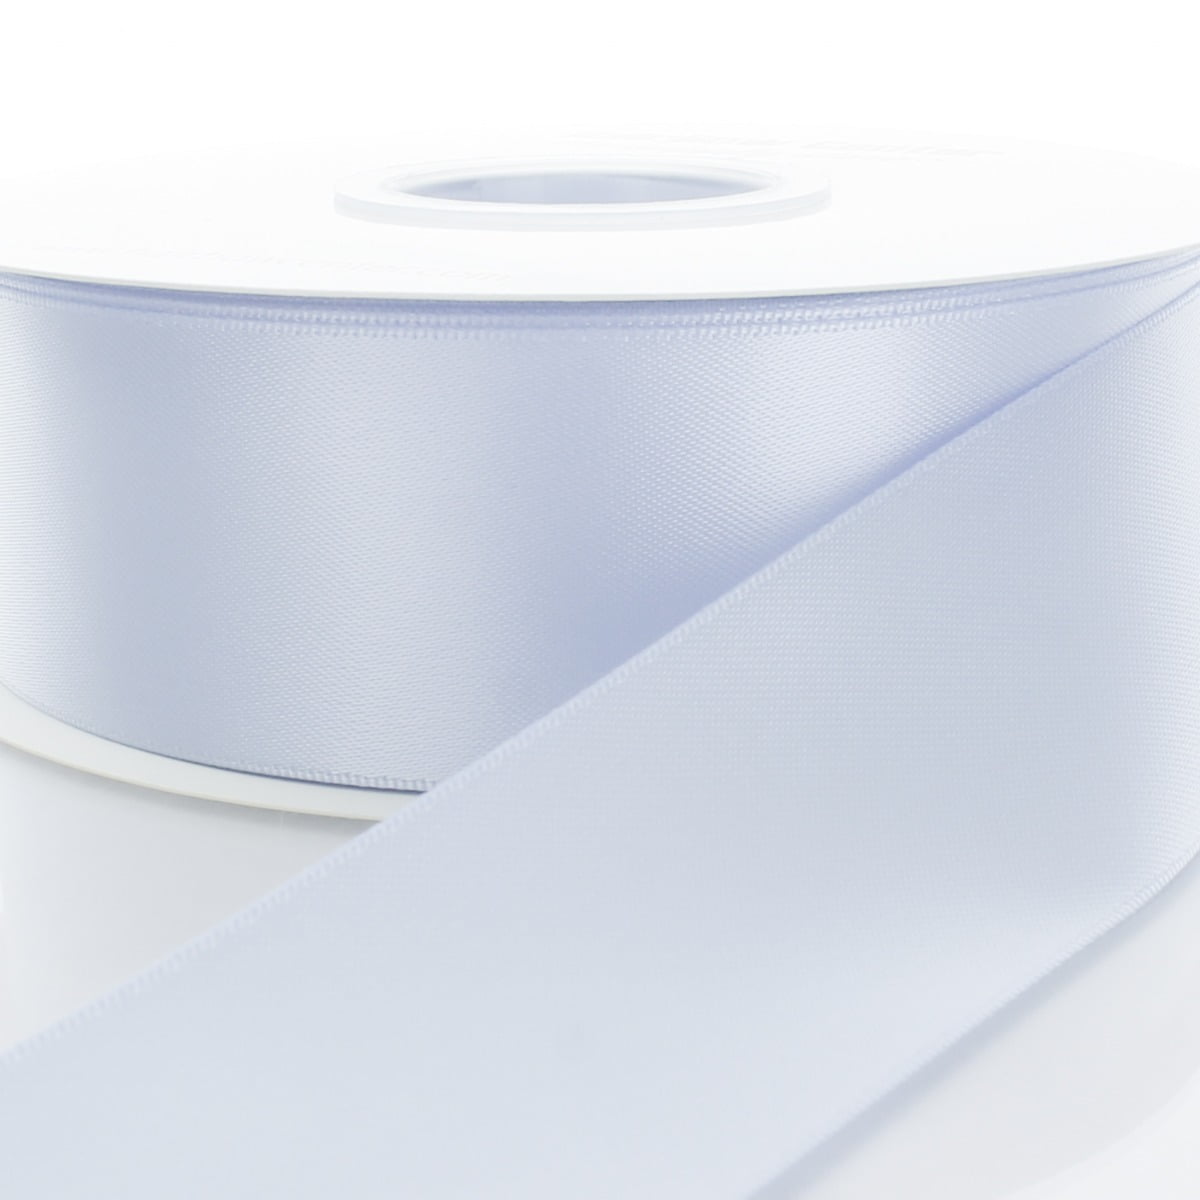 Light Blue Wired Double Face Satin Ribbon, 25 yards-WDFS-LB